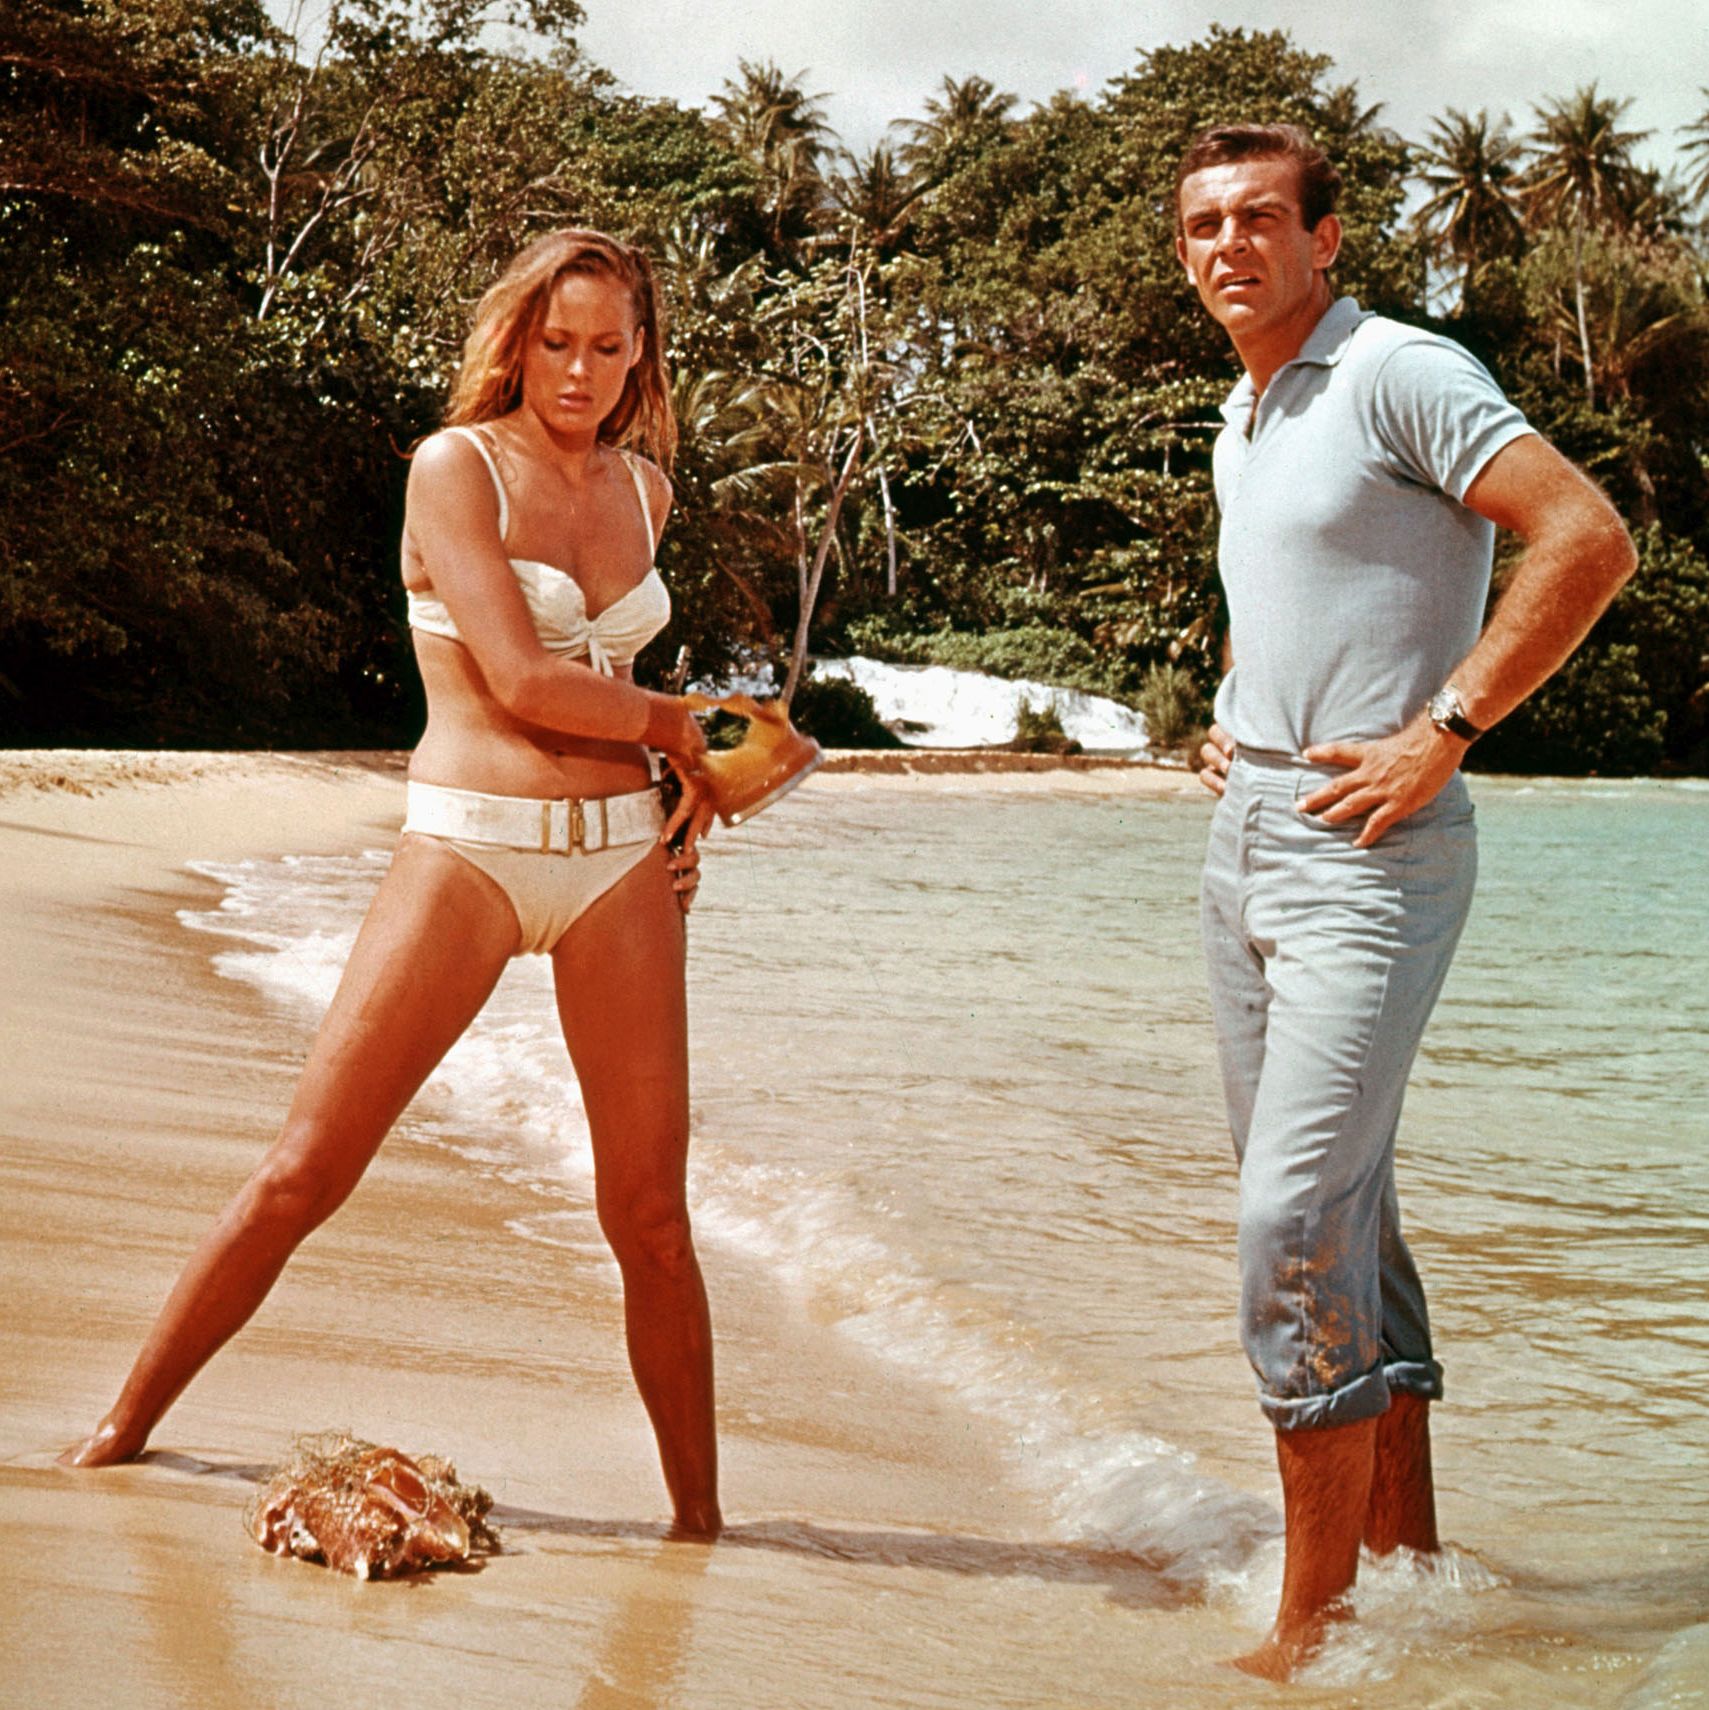 These Behind-the-Scenes Photos Show James Bond as You Rarely See Him